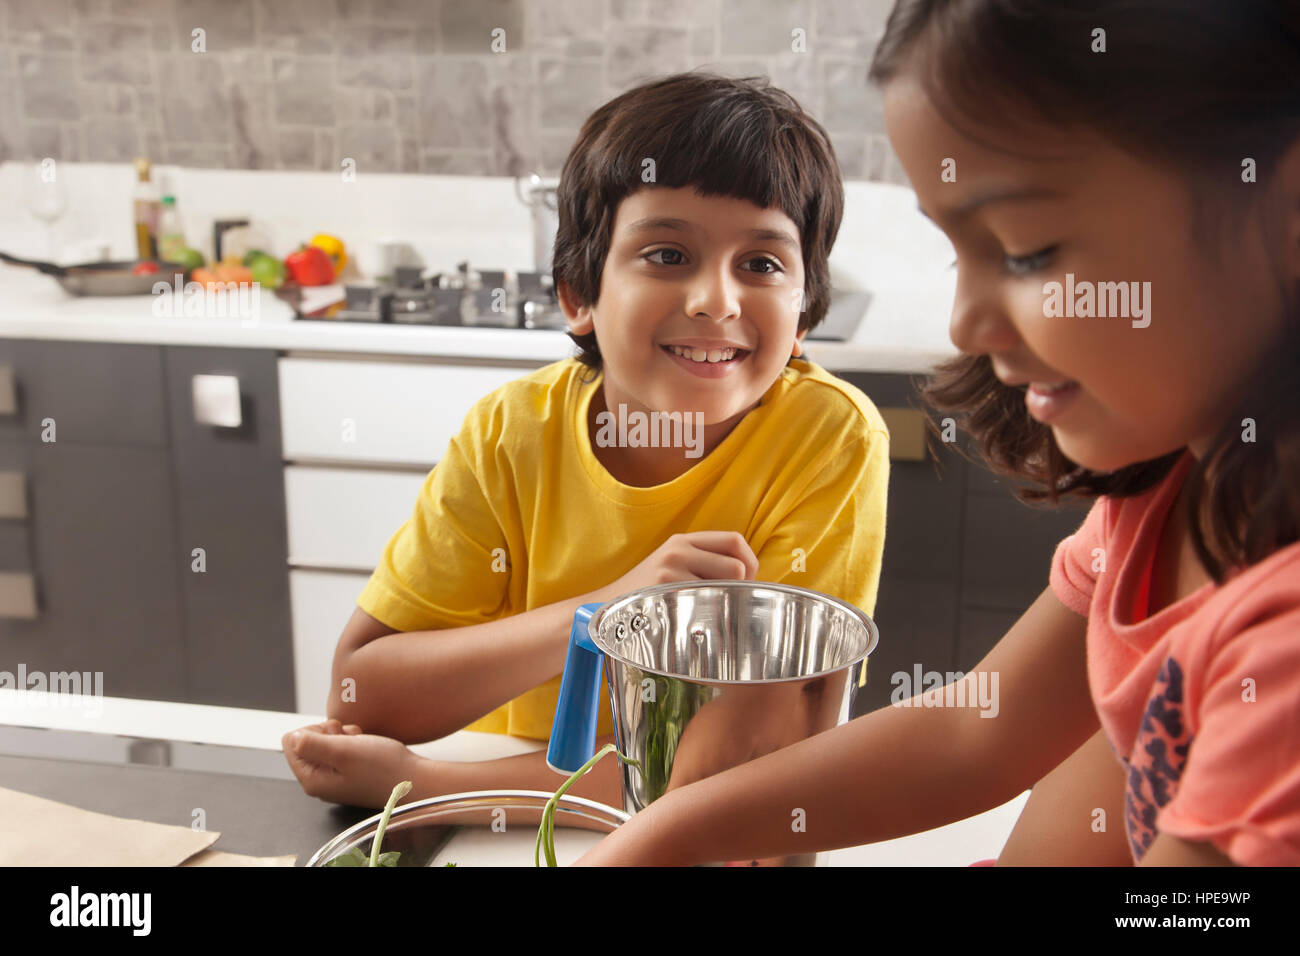 Two kids having fun together in kitchen Stock Photo